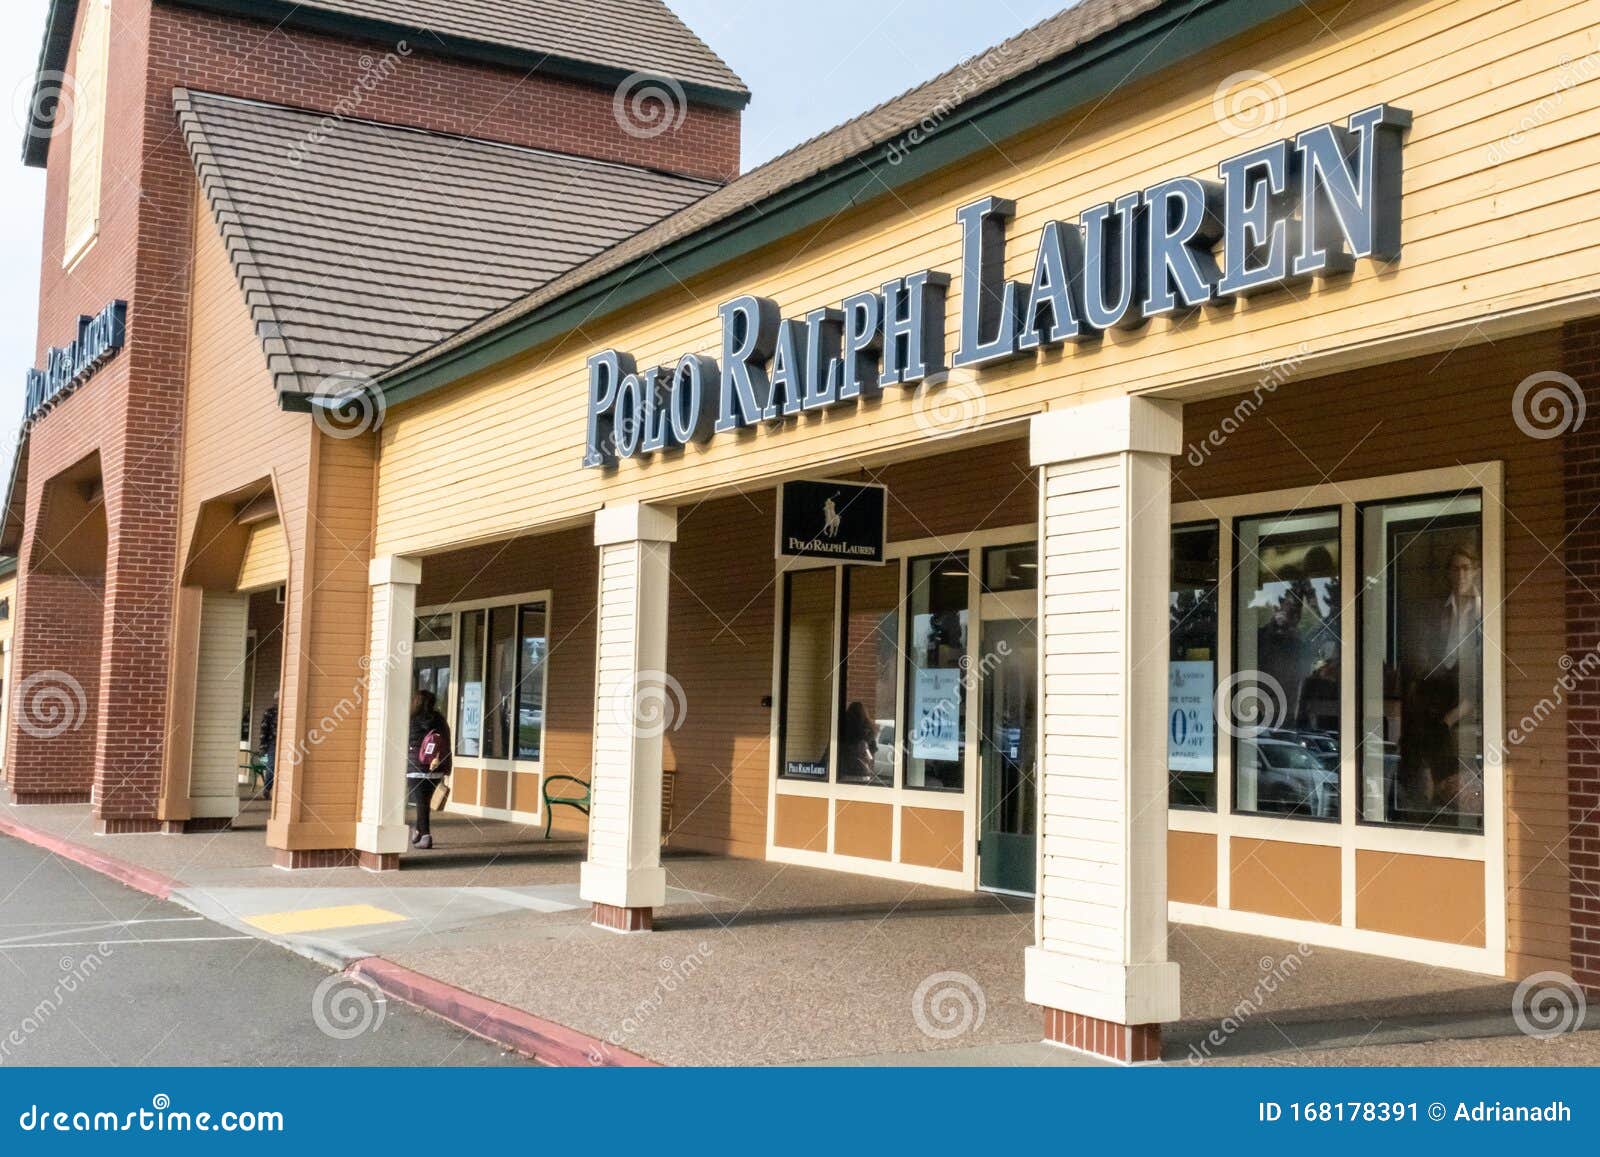 polo ralph laurent outlet